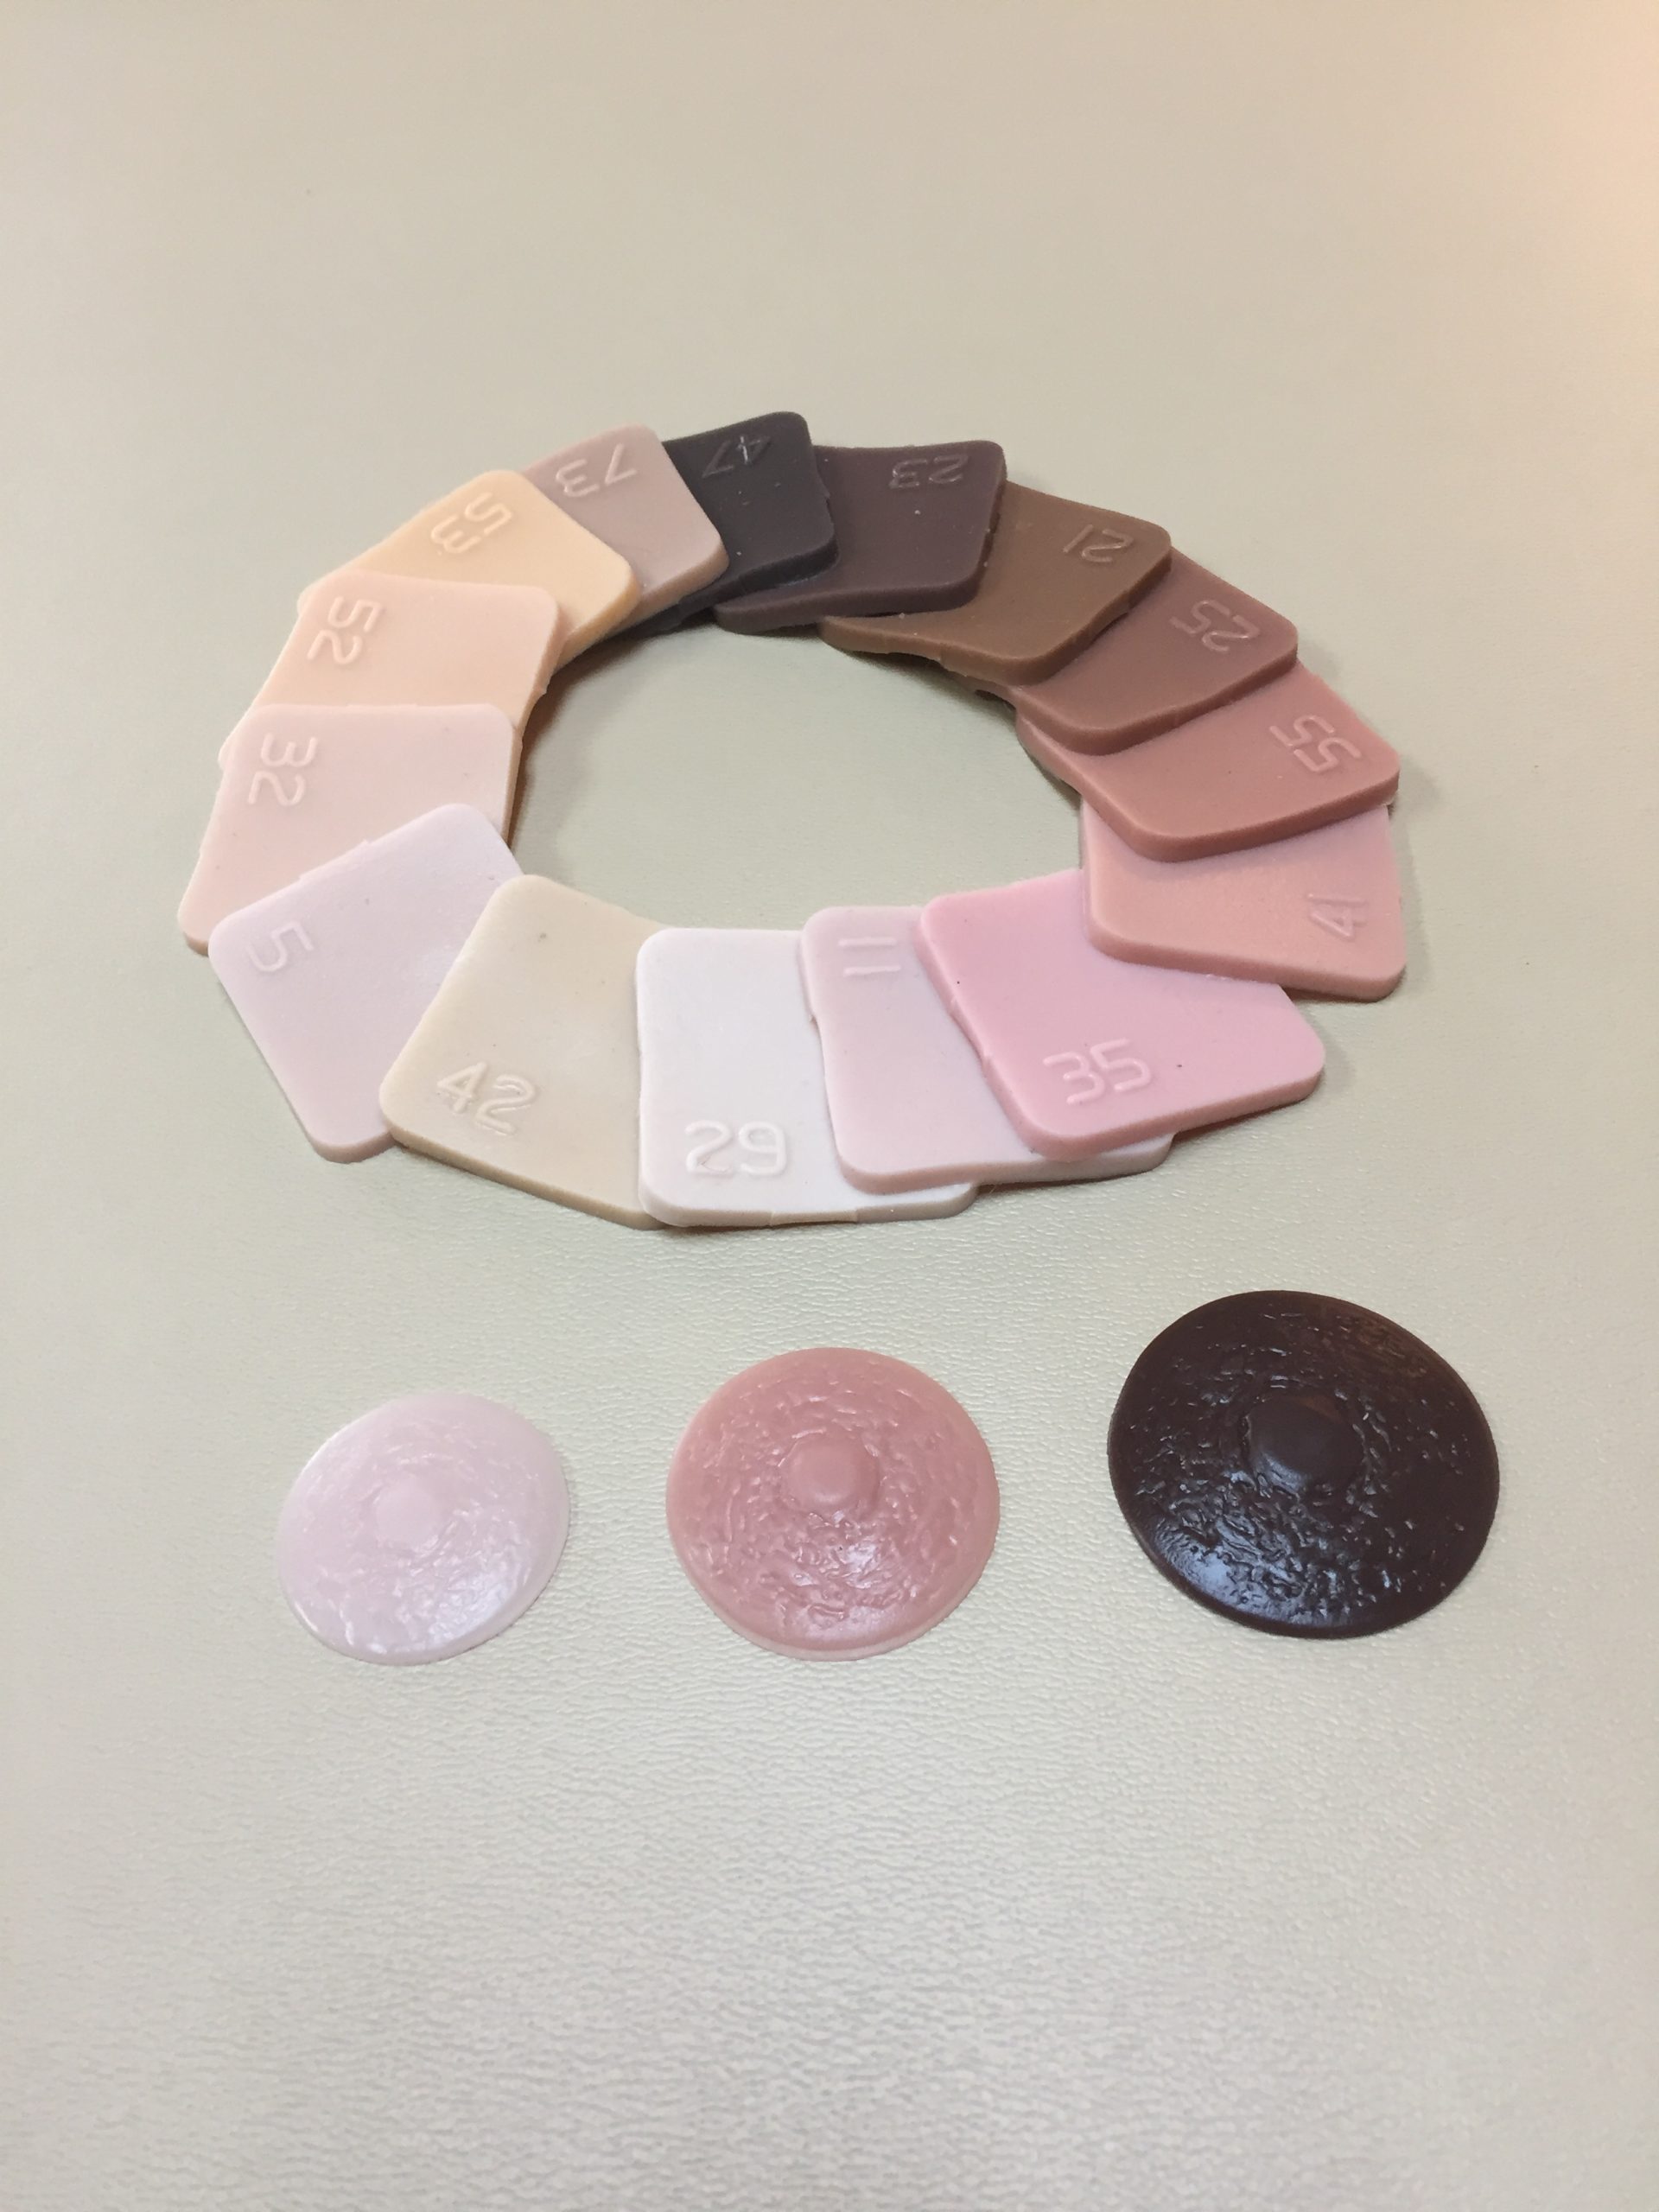 An assortment of about a dozen color sample squares are laid out in an overlapping circle to display the various skin colors available. Three nipple prosthetics of various colors and sizes are also laid in front.